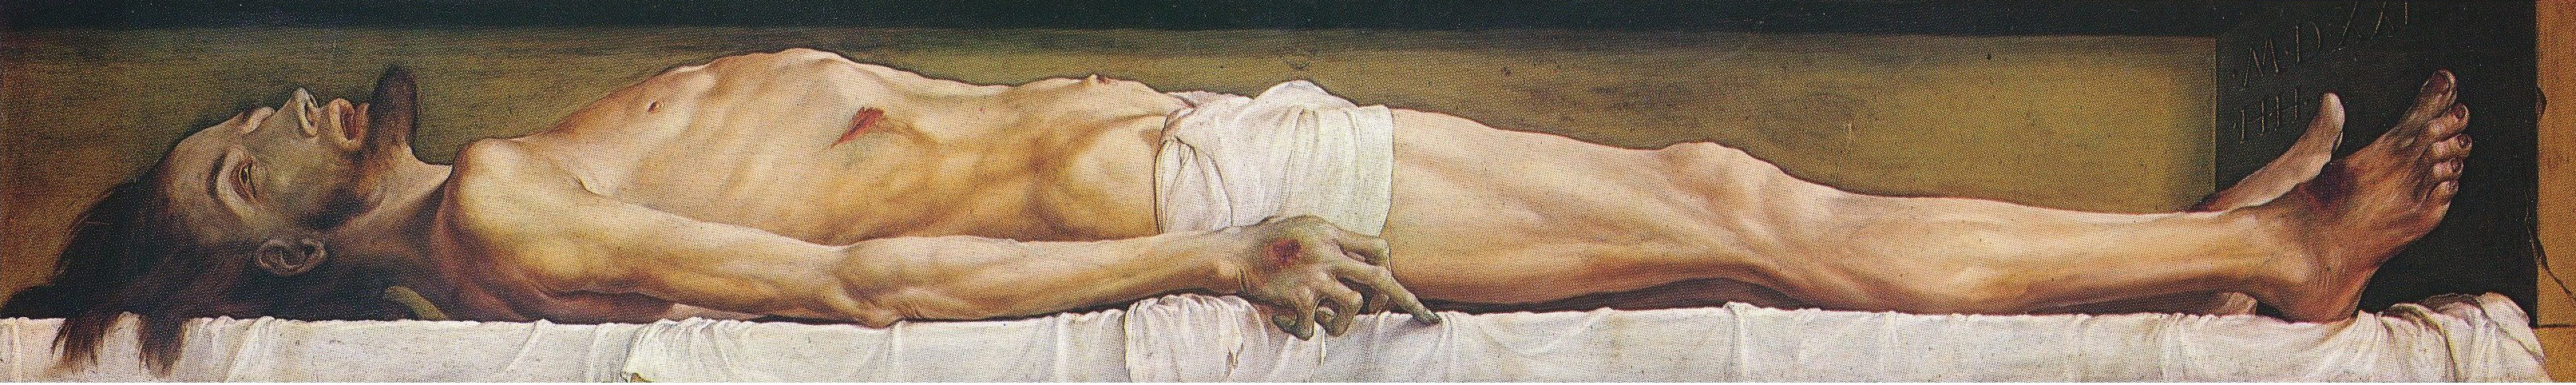 Hans Holbein- The Body of the Dead Christ in t...